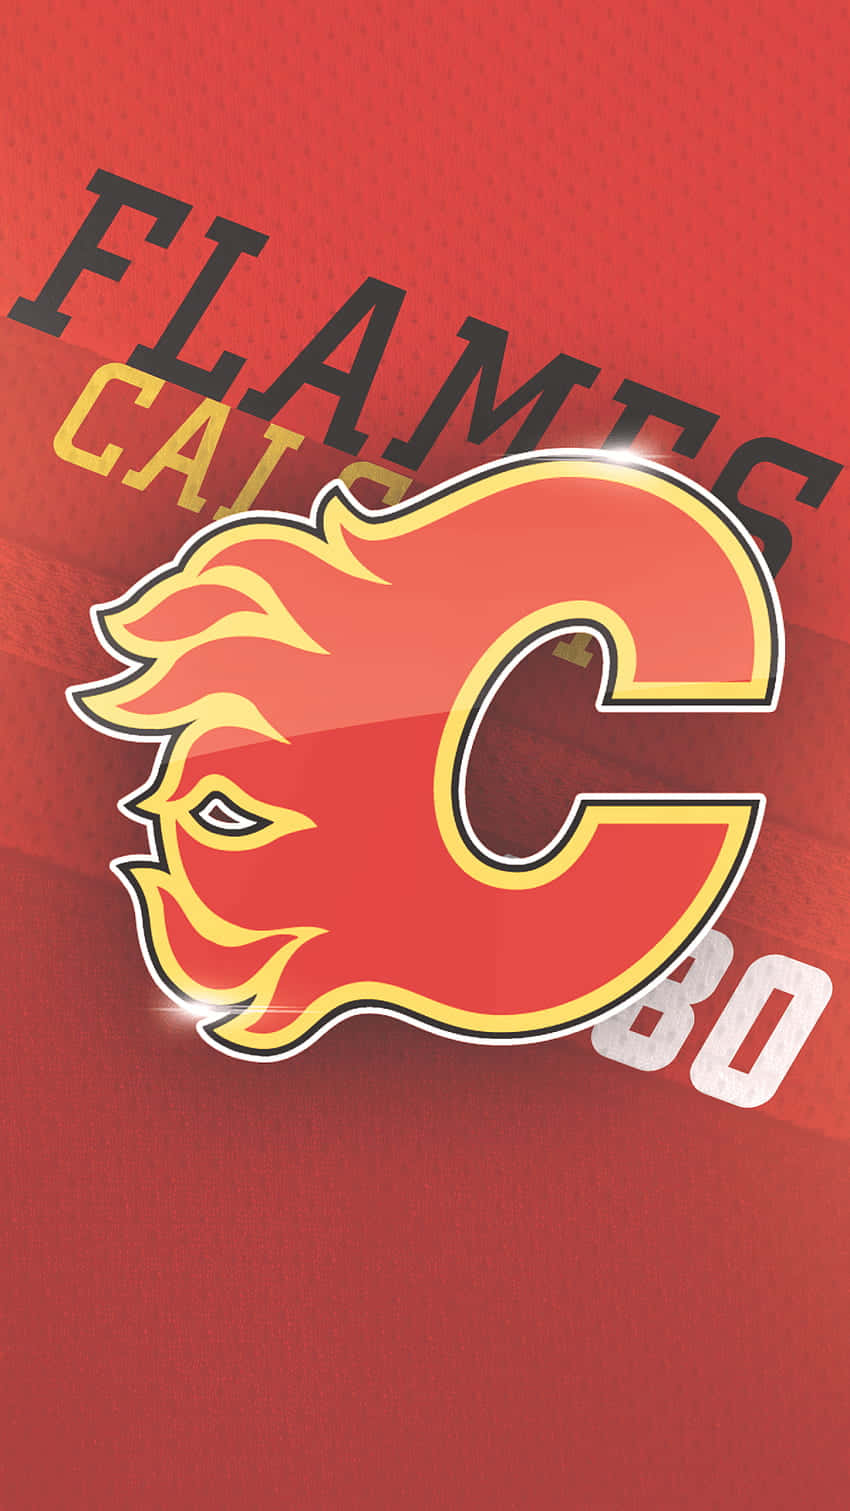 Support the Calgary Flames with pride!